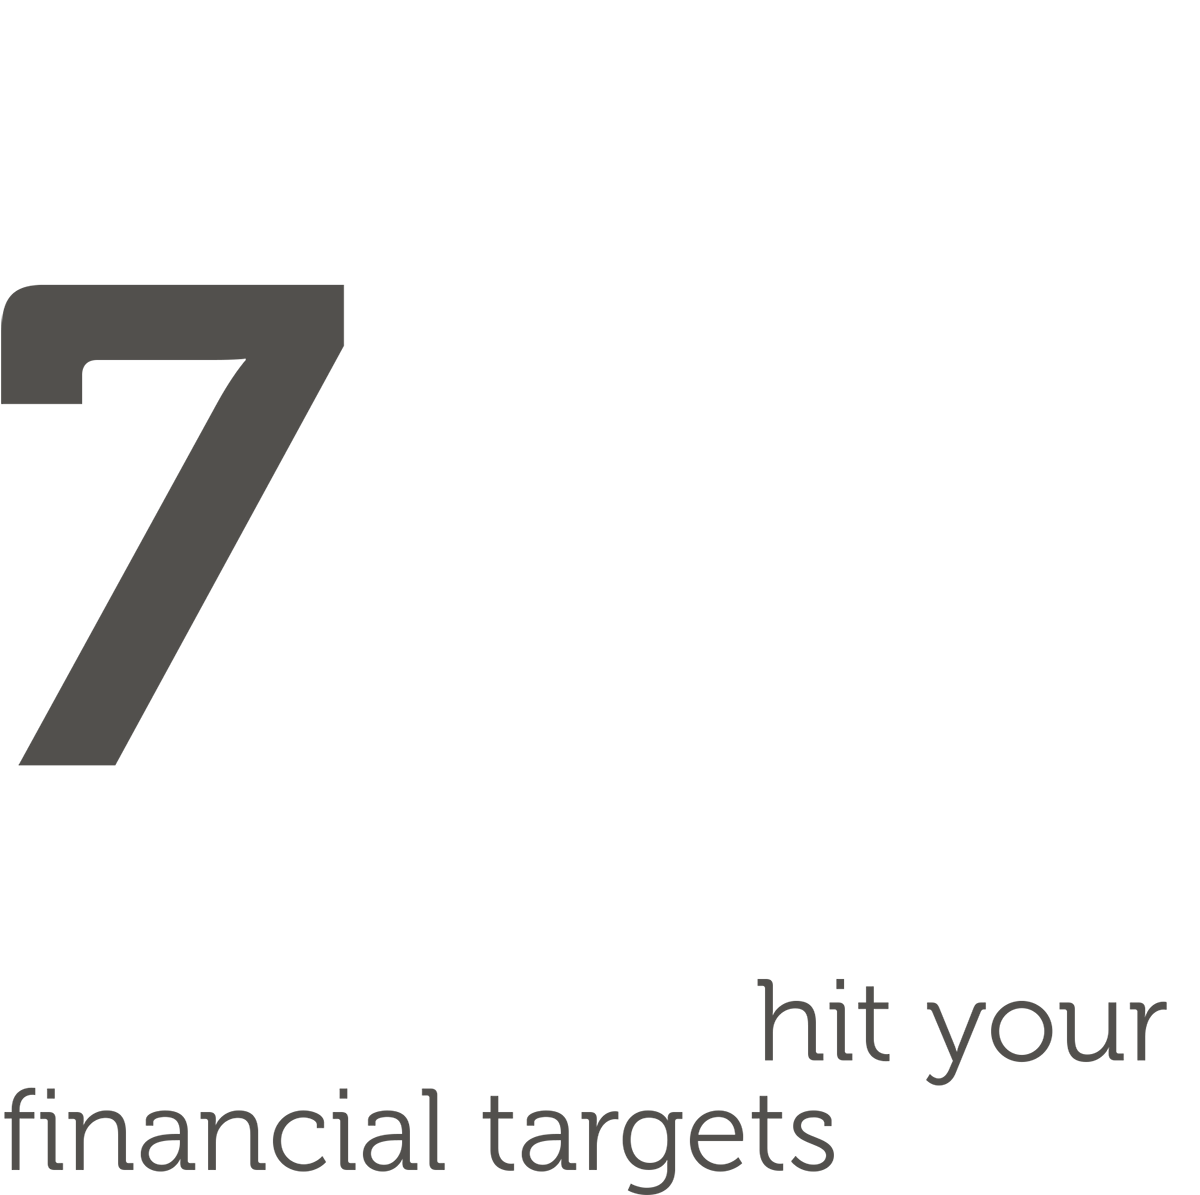 Recovering from COVID-19 - 7 Key Steps To Accelerate B2B Sales Contracts And Hit Your Financial Targets.